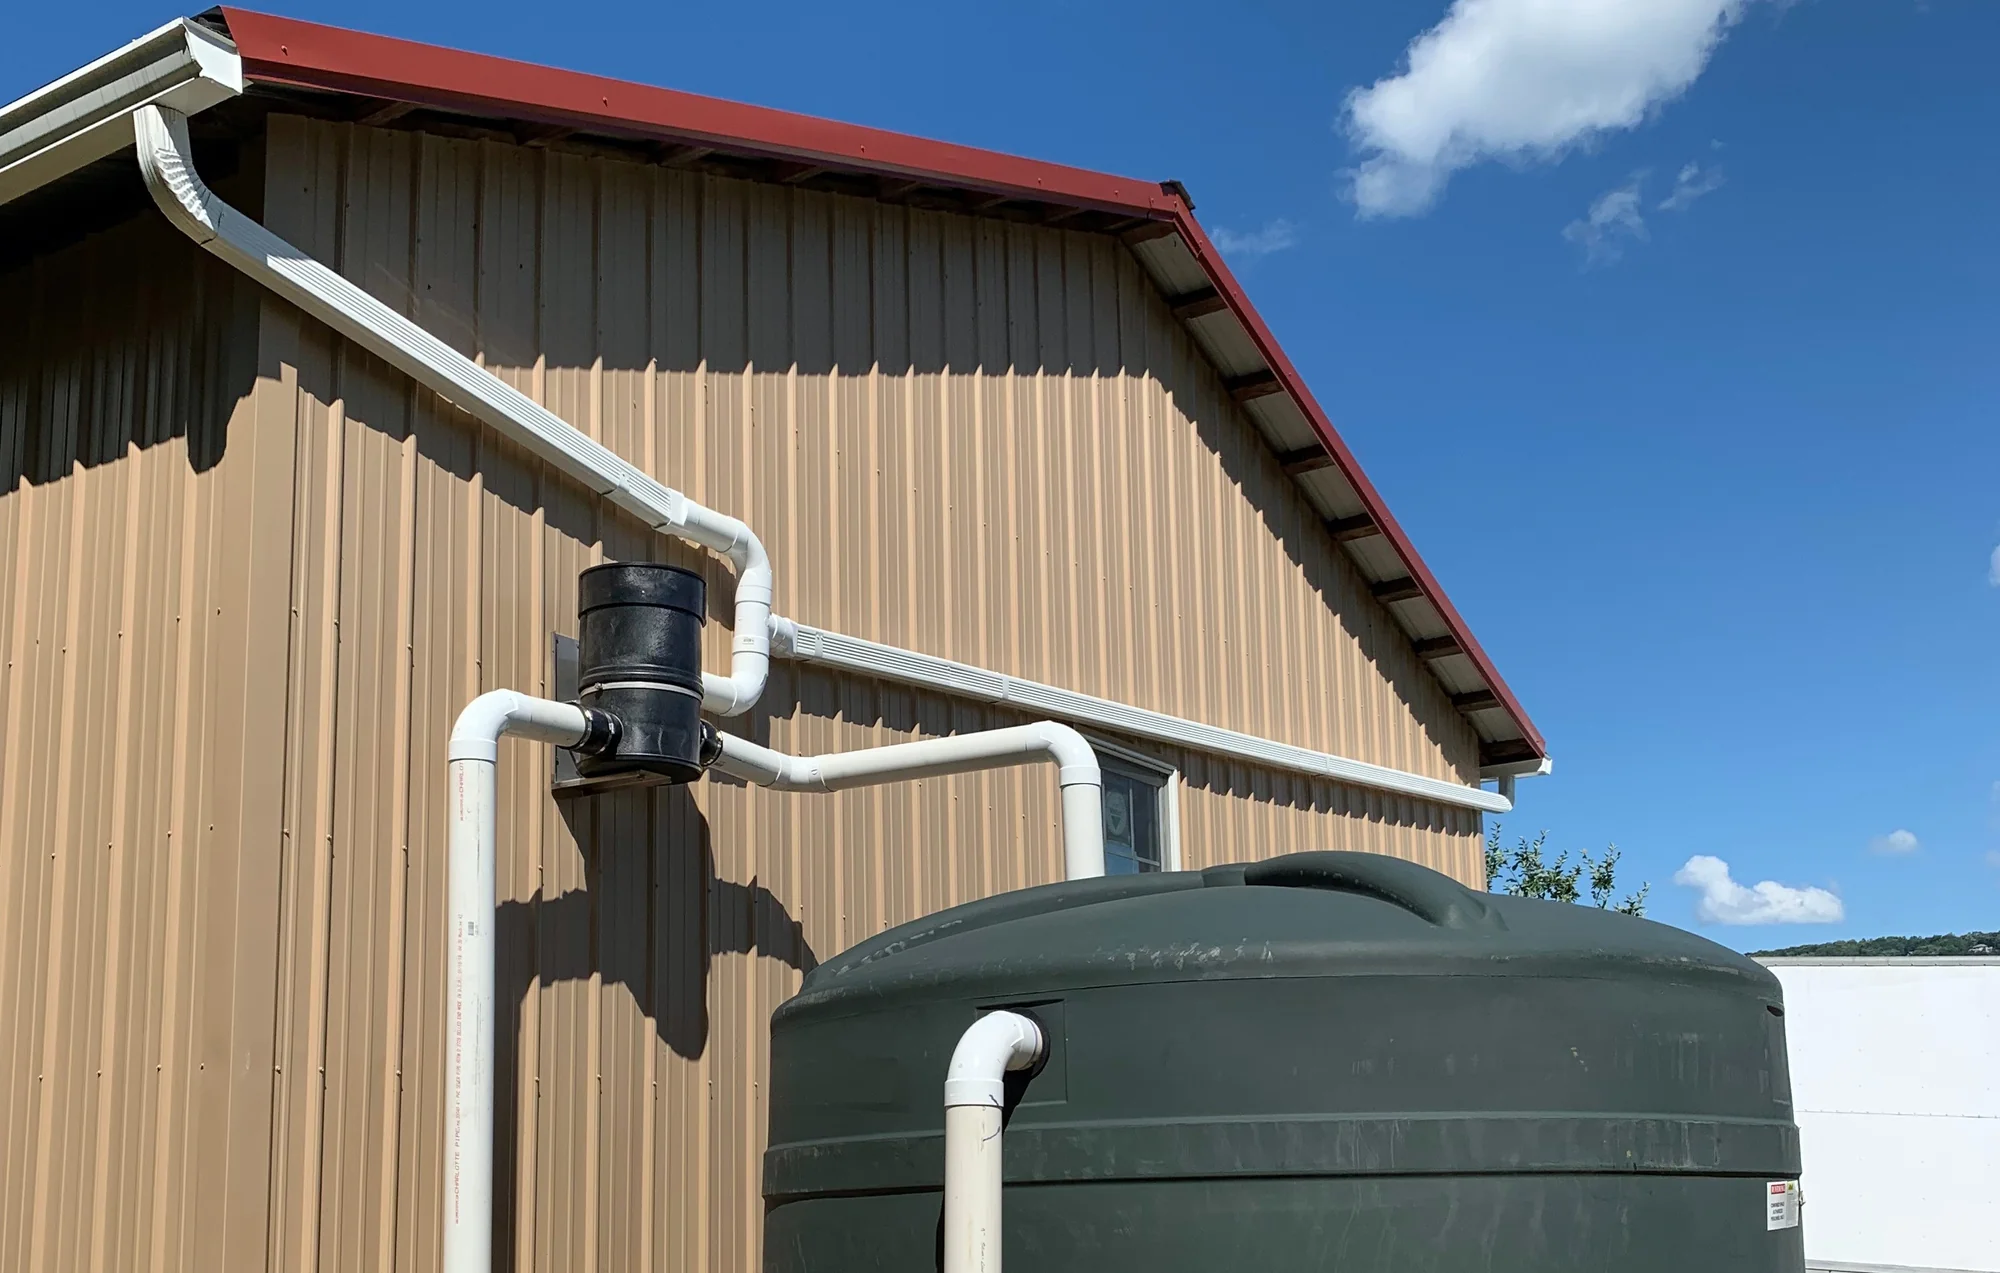 How To Implement Rainwater Harvesting Systems at Home